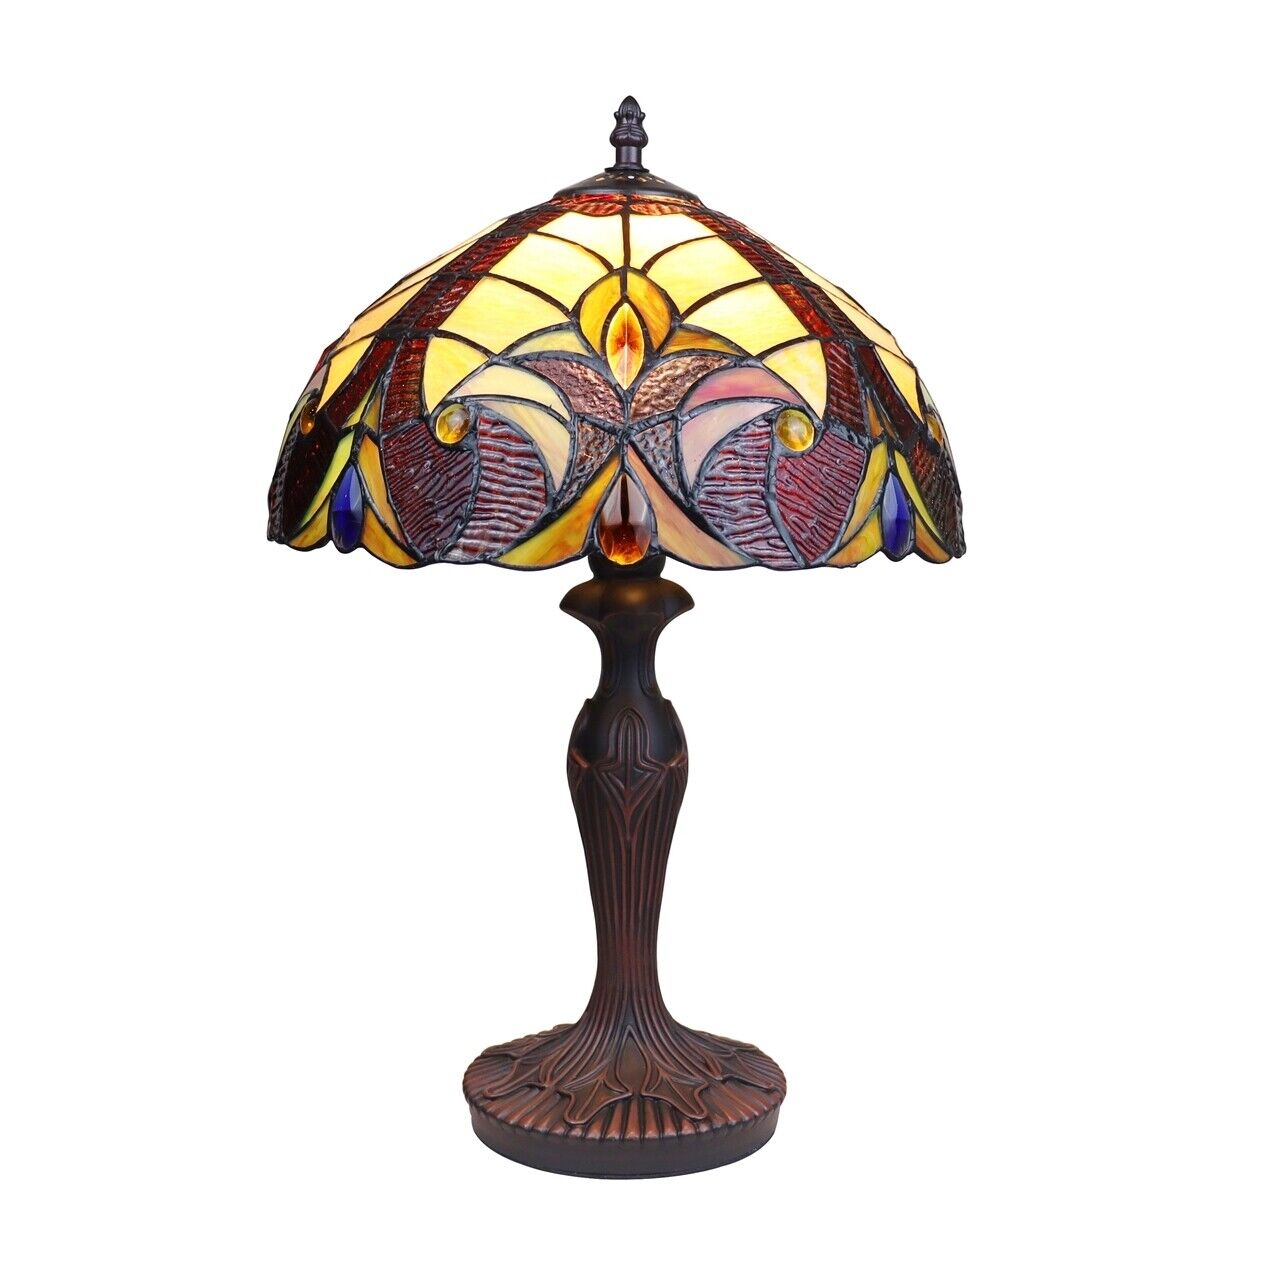 18.3" 1 light Stained Glass Table Lamp